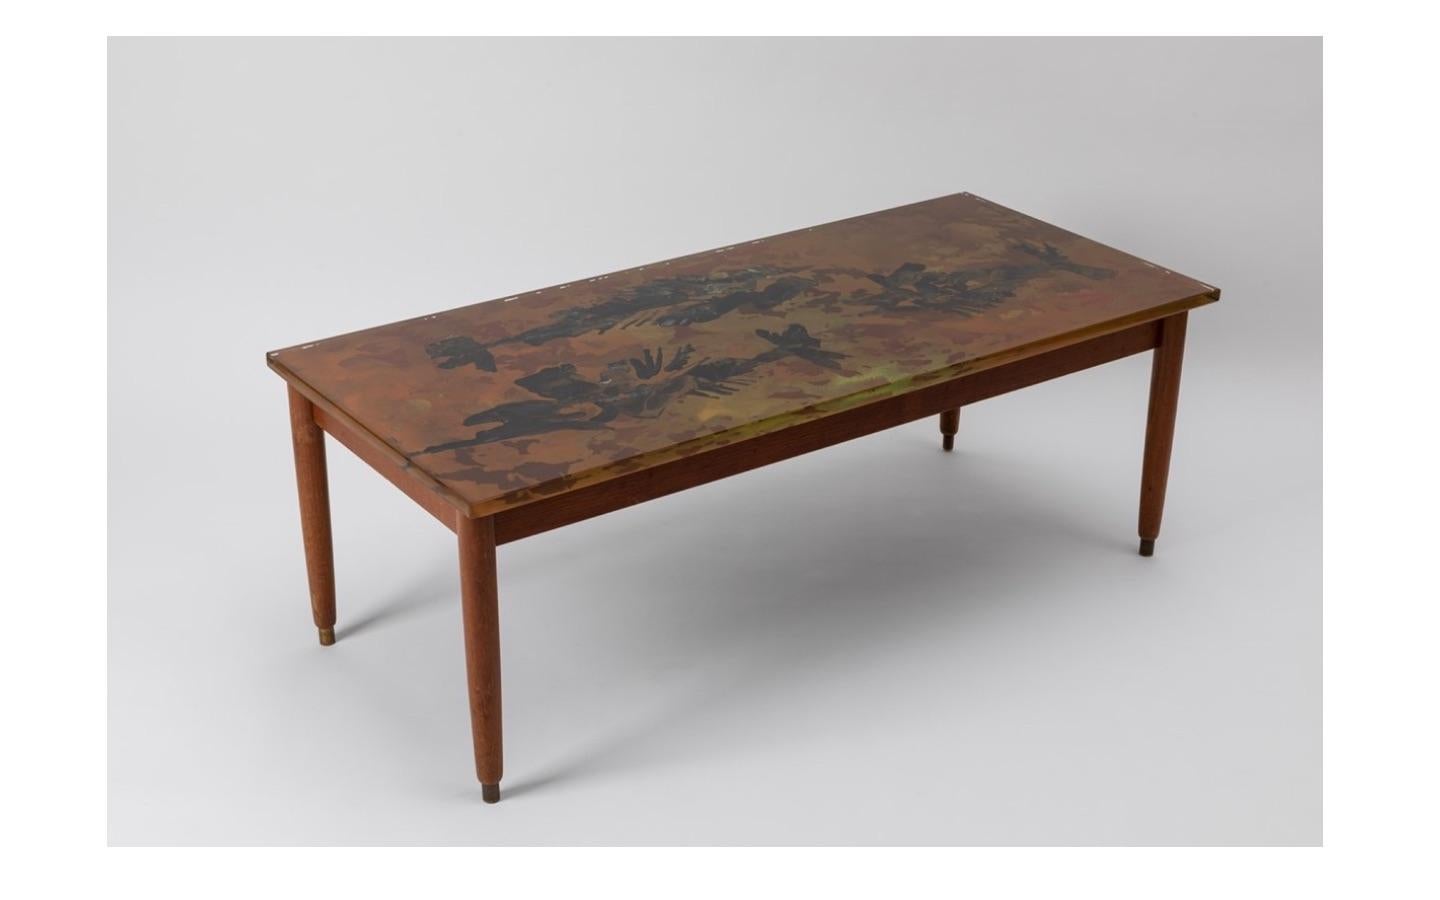 Coffee table in thick cut and painted crystal designed by Duilio Bernabè (Dubè) and produced by Fontana Arte in circa 1950. Signed 